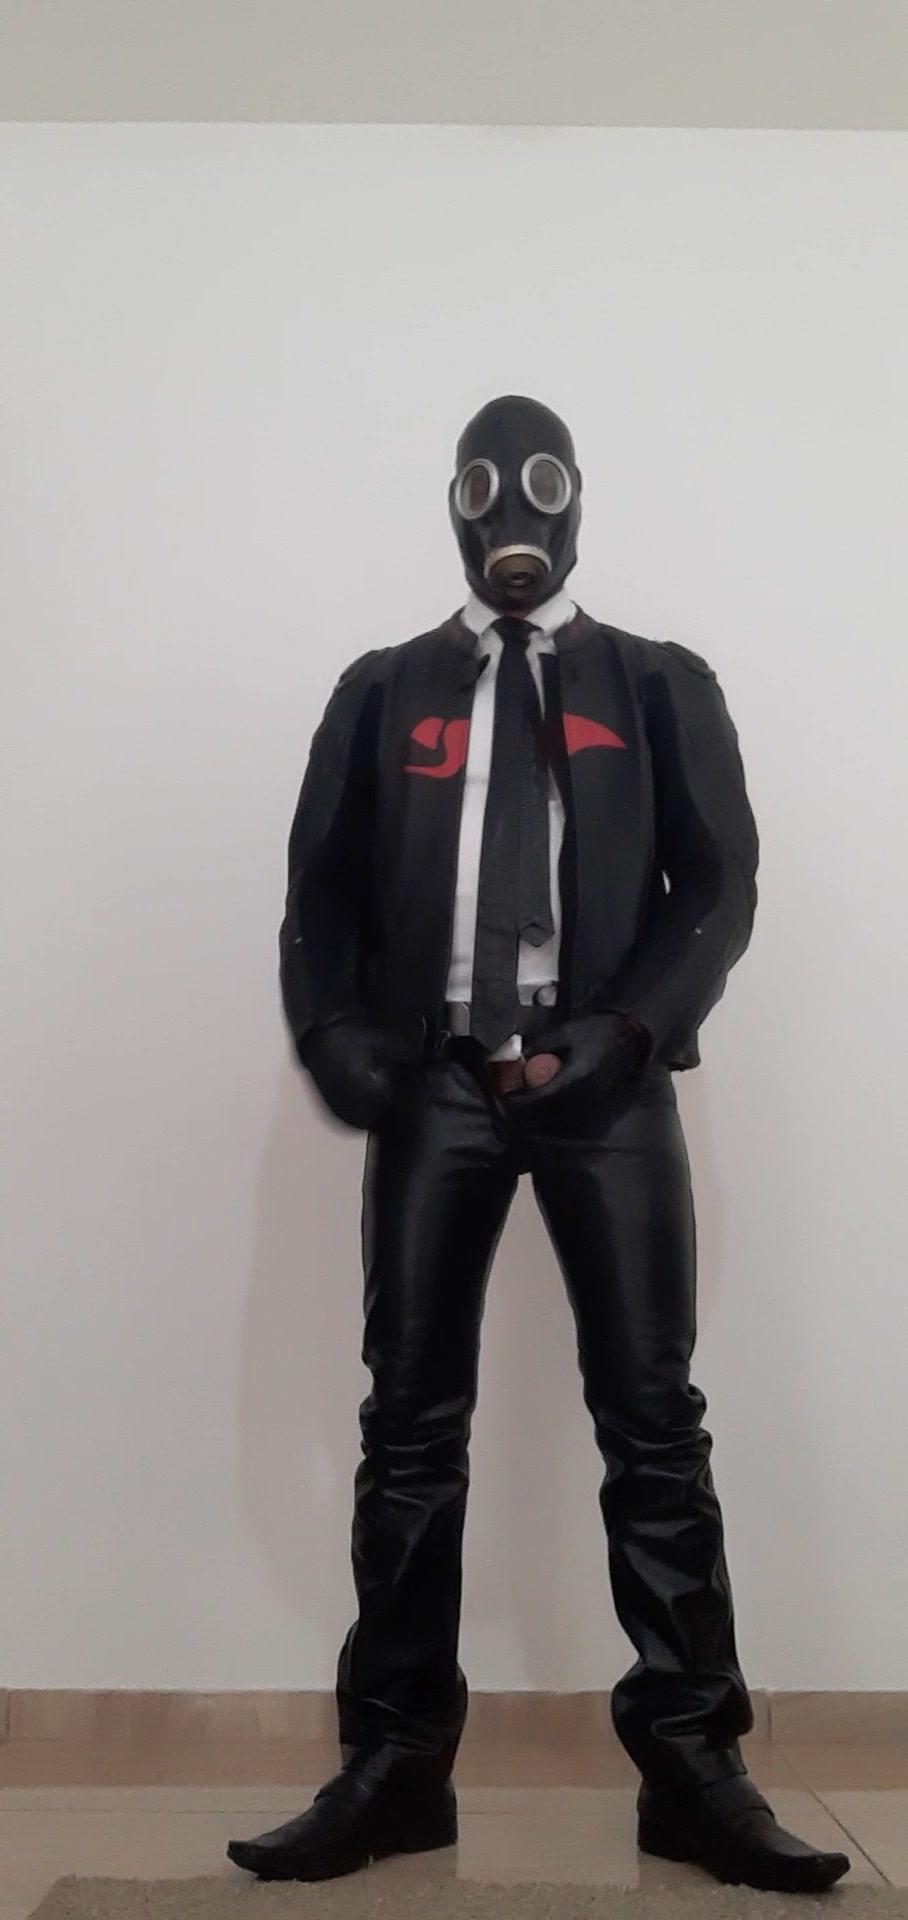 Leather pants and jacket   gloves and gasmask!